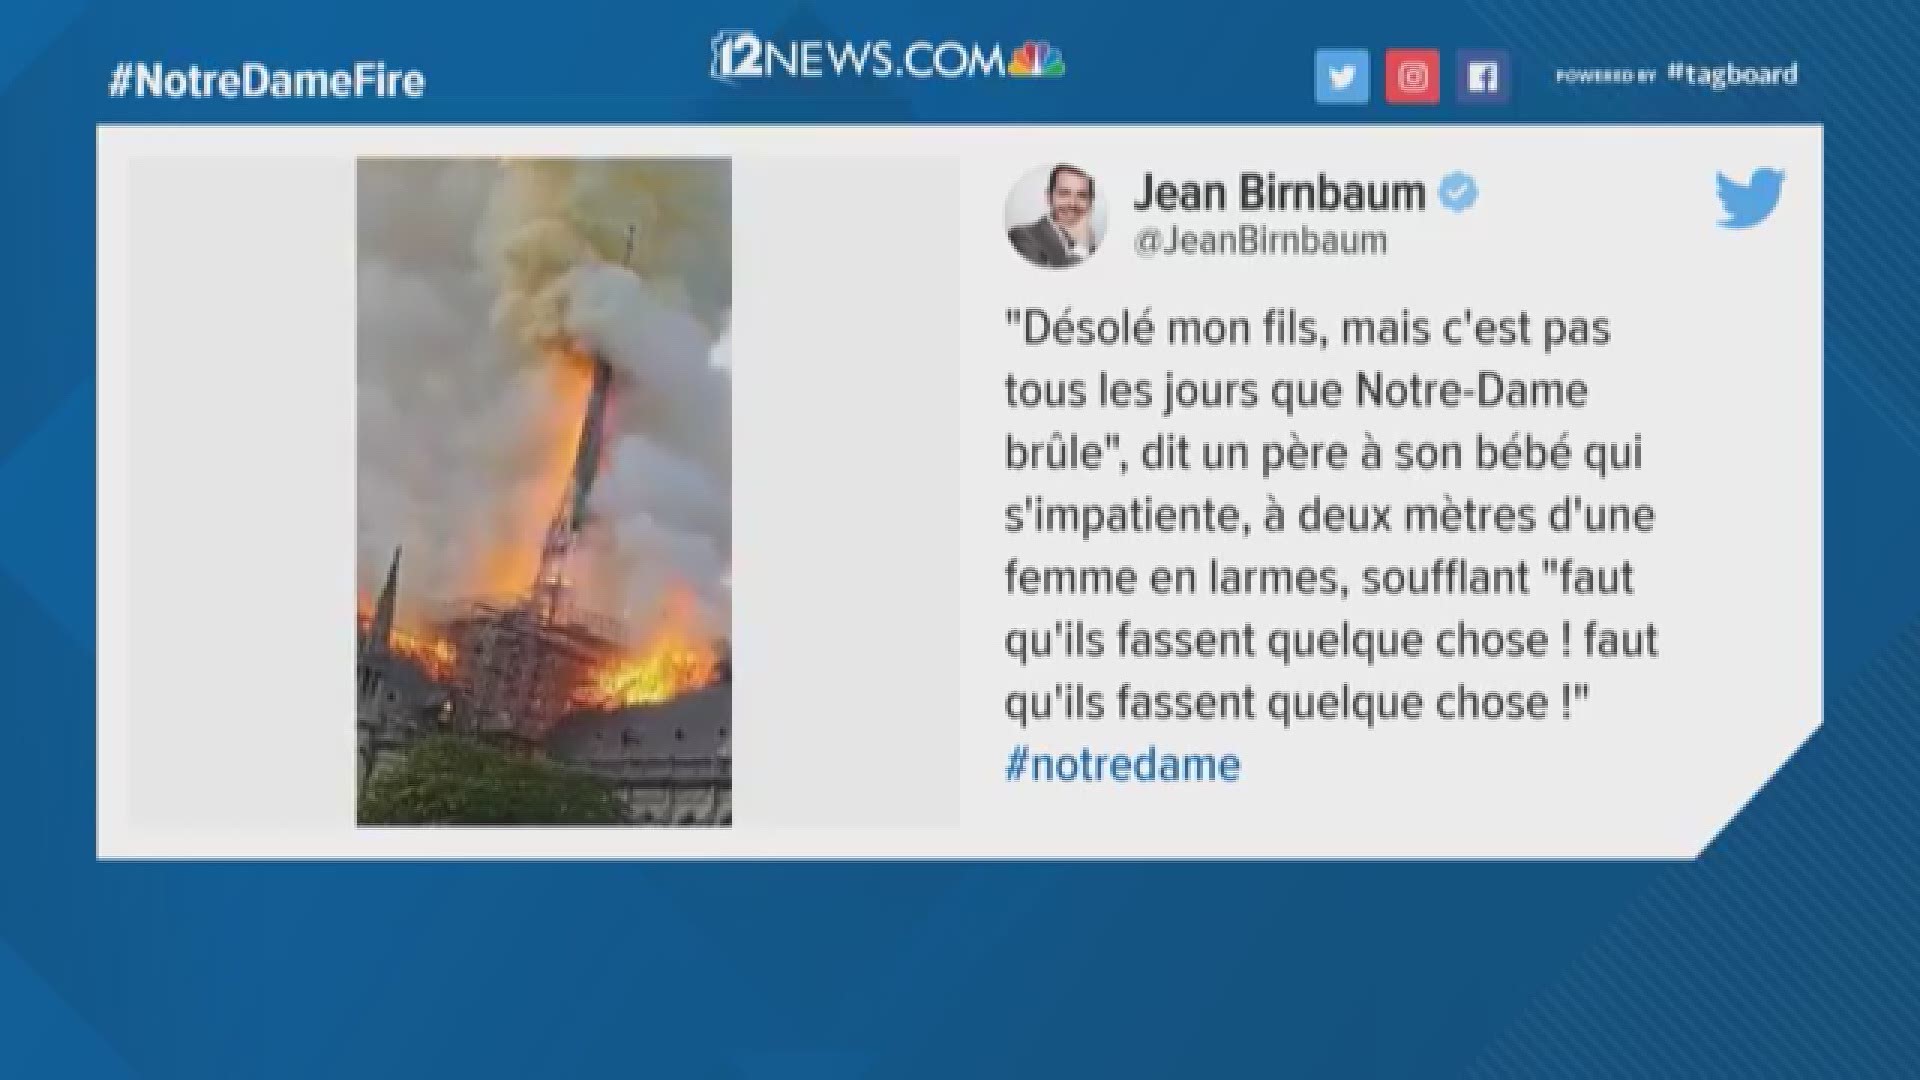 A fire broke out at Notre Dame Cathedral on Moday. Here are some posts showing footage from the scene.